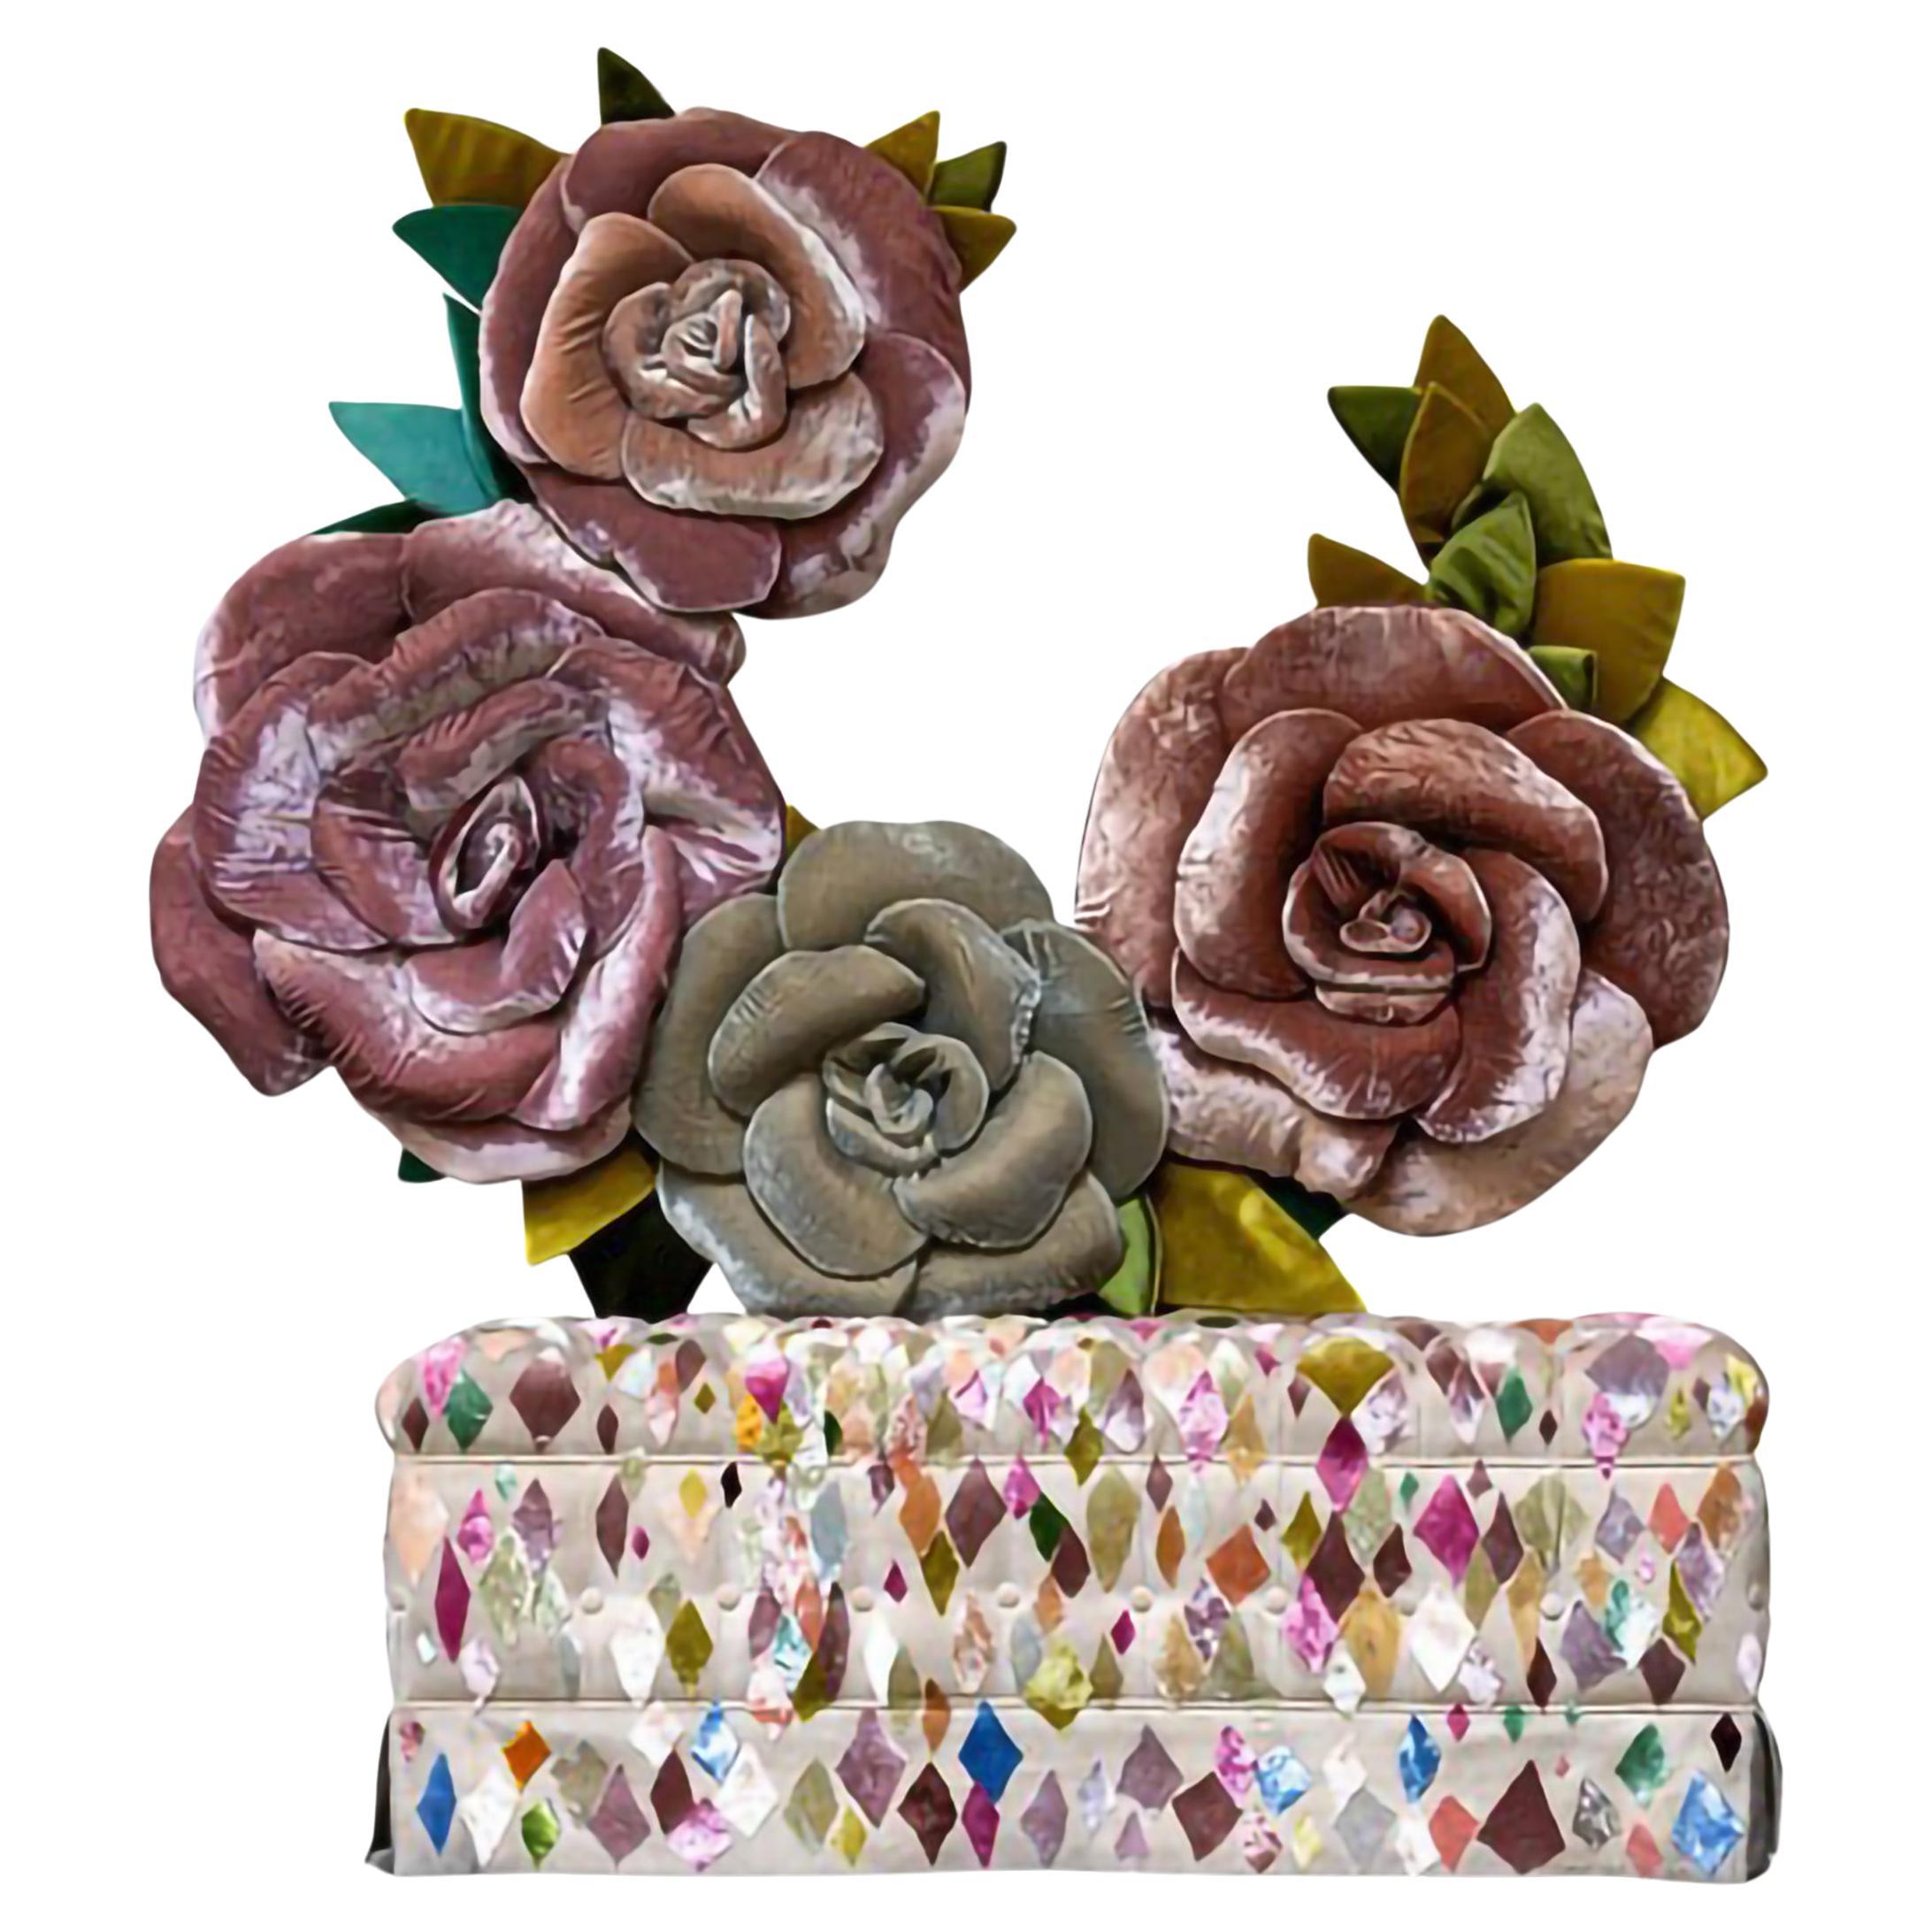 Contemporary Art Pouf - Rose of Saint Petersbourg by Carla Tolomeo